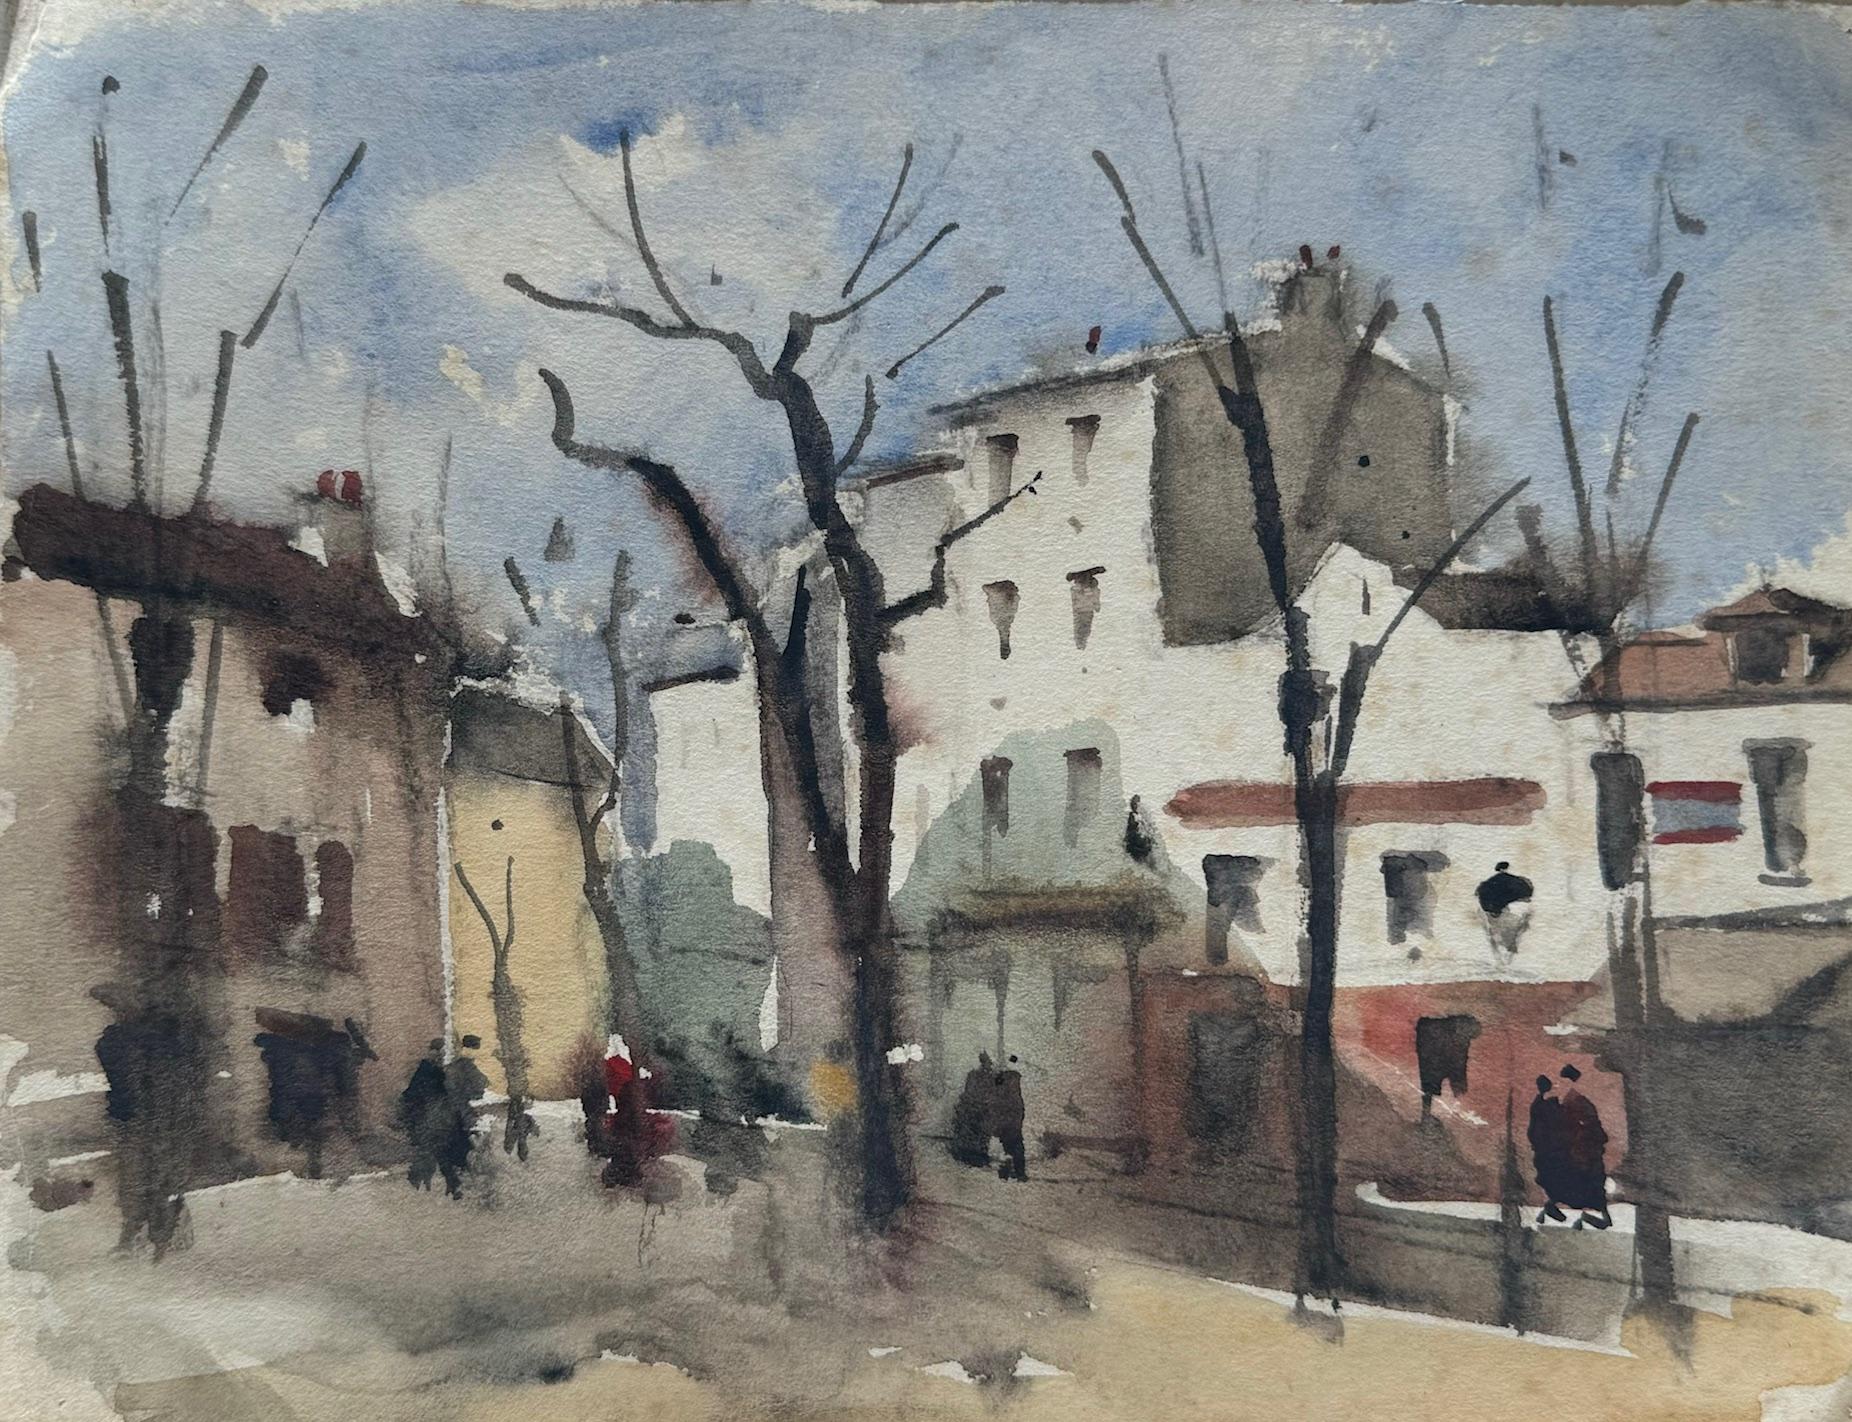 Unknown Still-Life Painting - Parisian Stroll, Mixed Media on Paper Colorful Paris City Scene